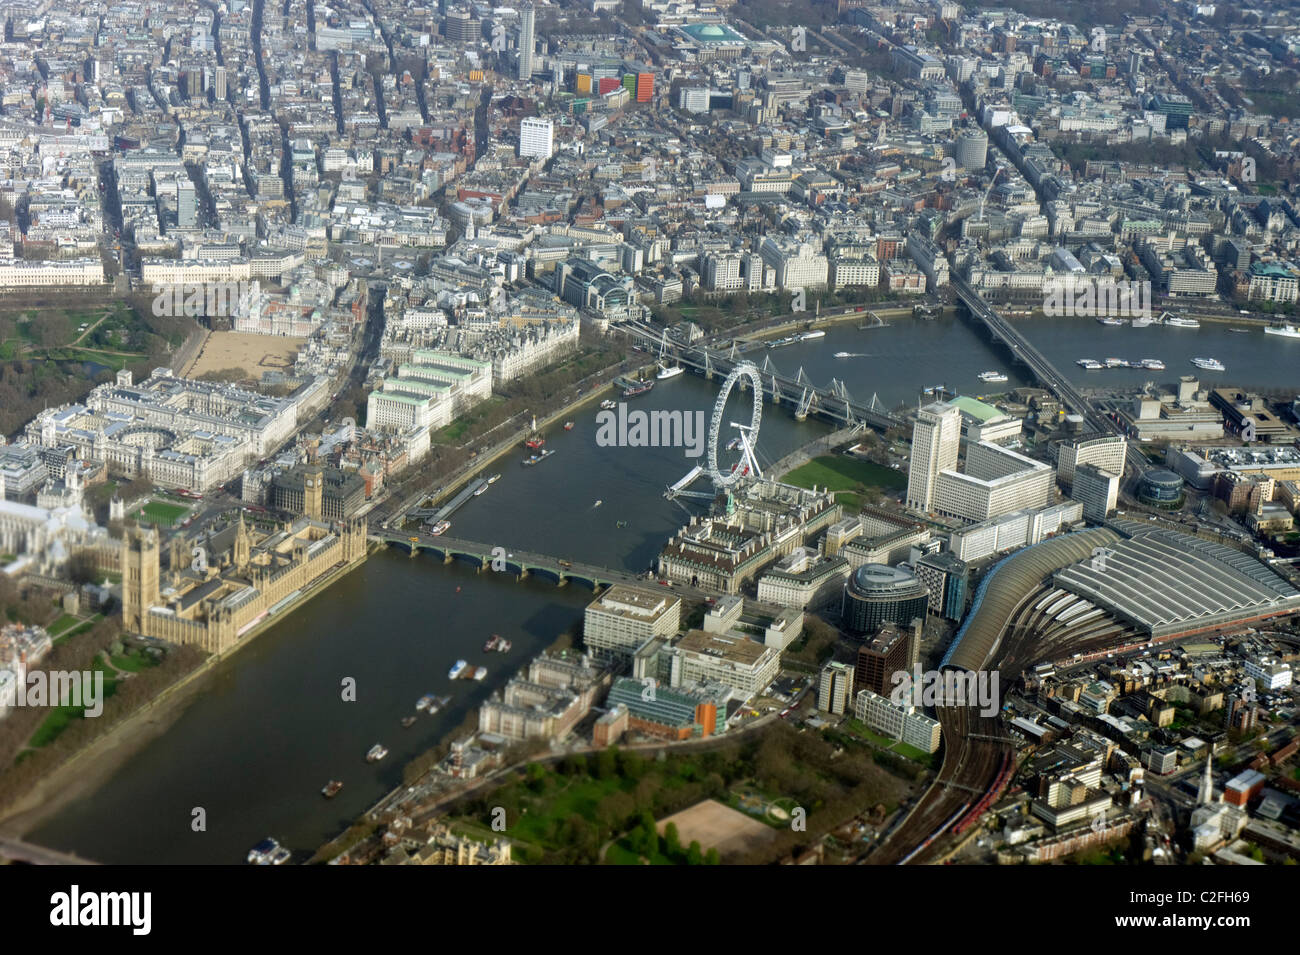 Aerial view of Waterloo station, London Eye, Big Ben and the Houses of Parliament Stock Photo